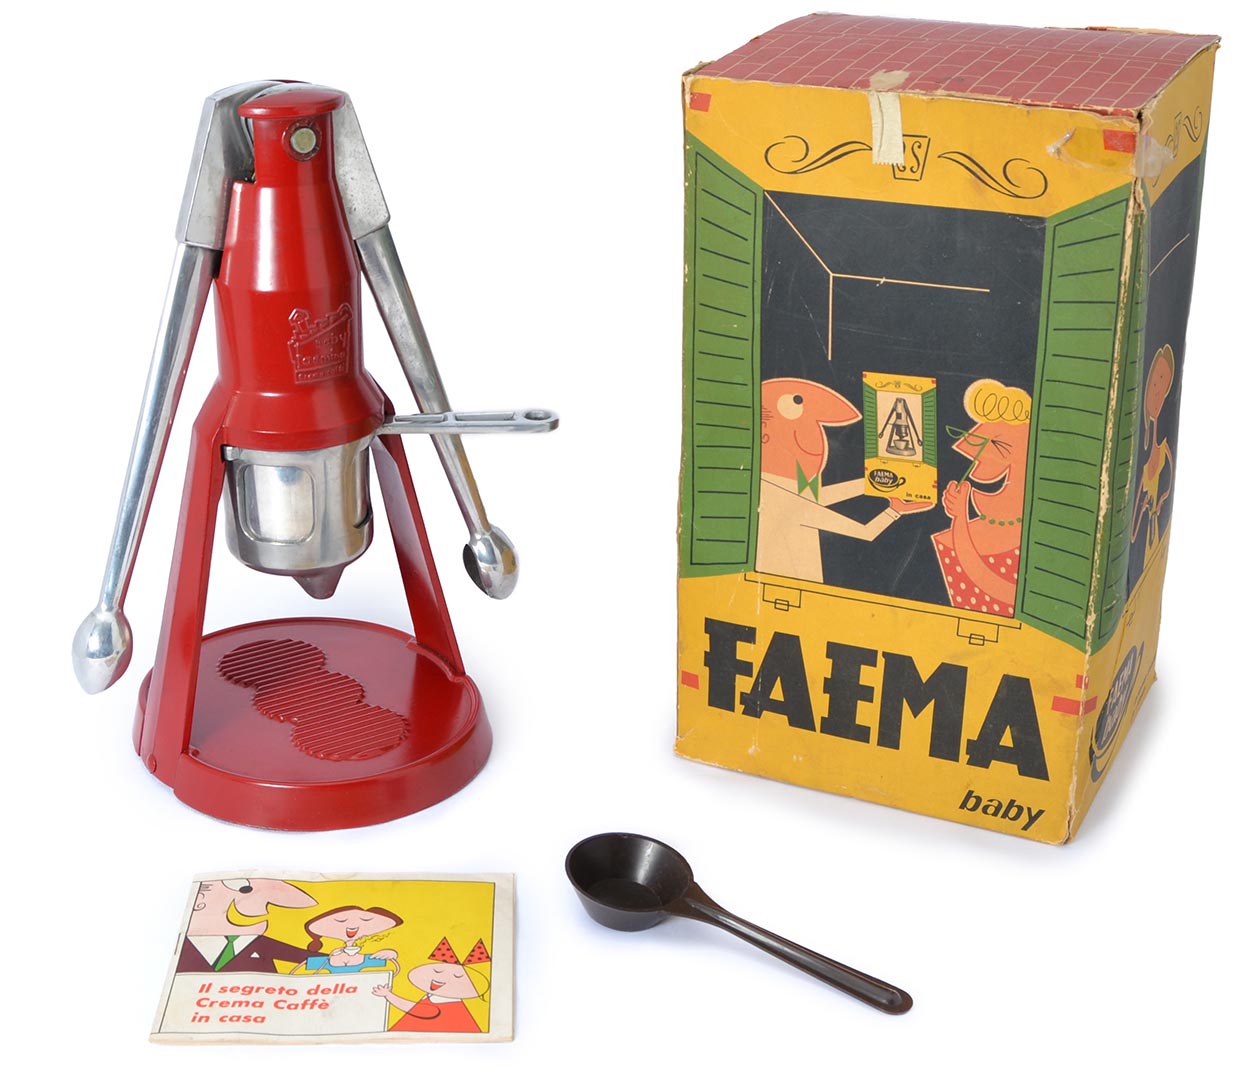 Faema Baby in the aluminium version and with the olive-shaped knobs